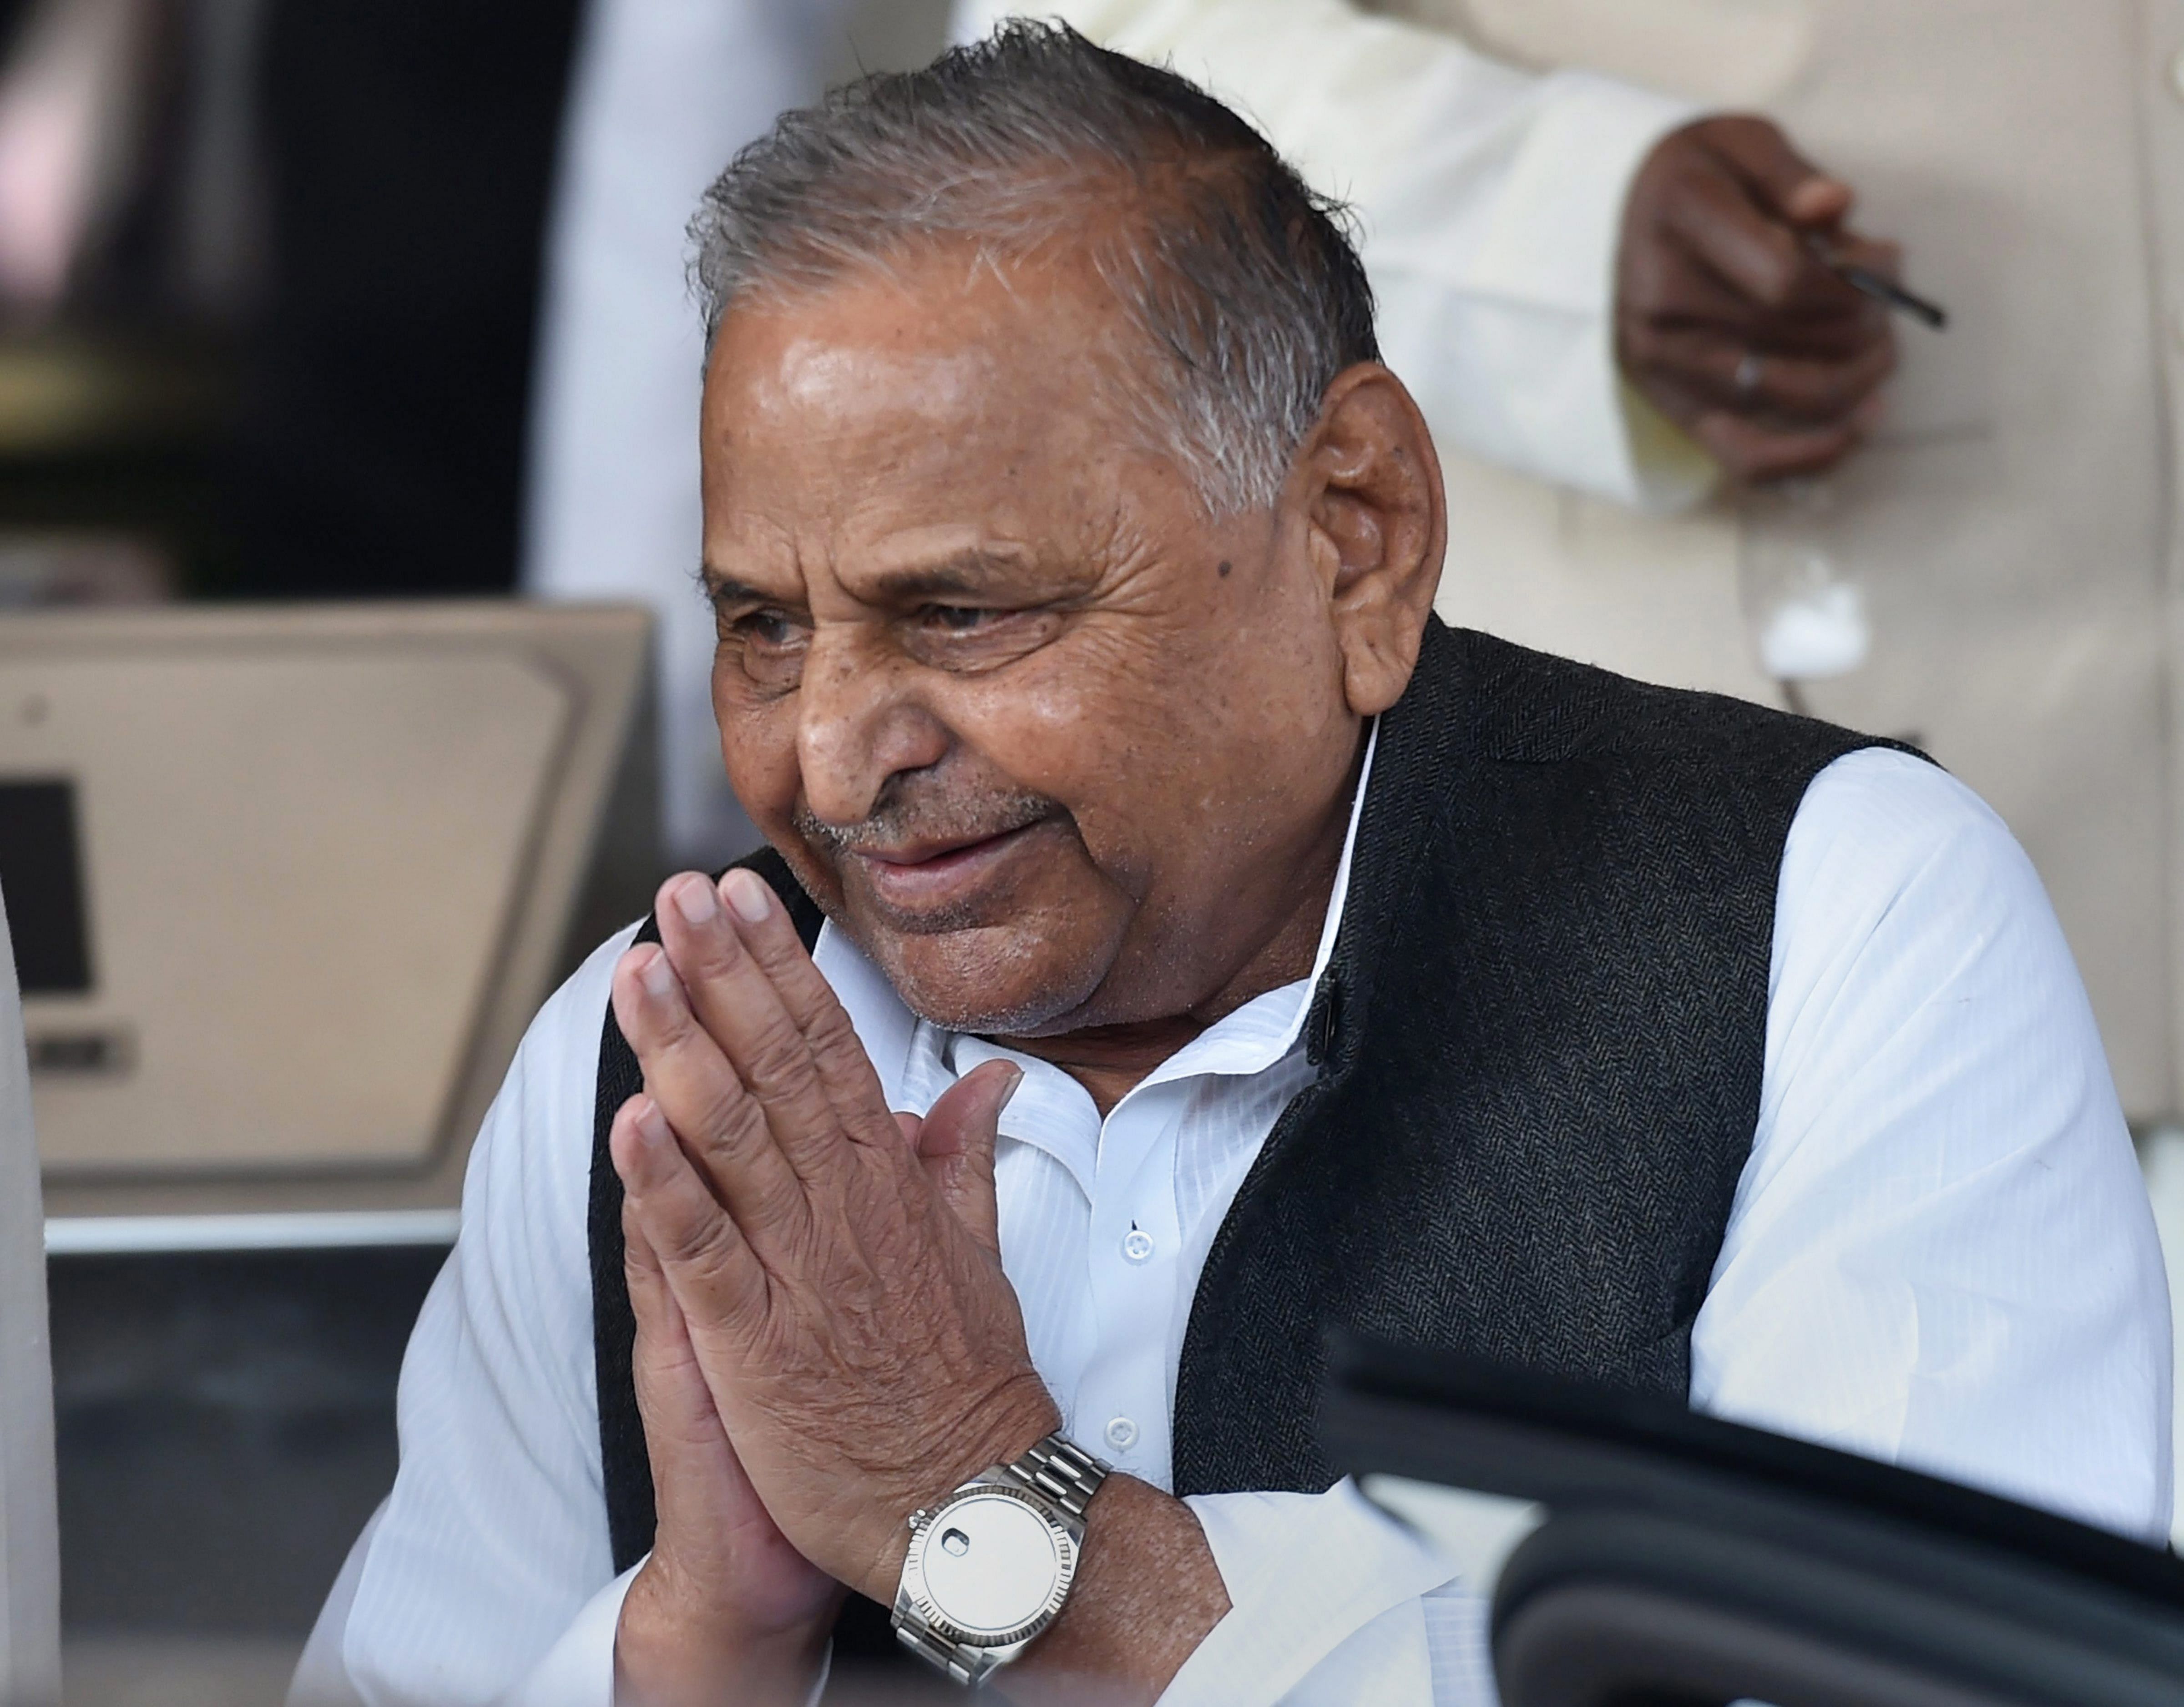 Mulayam Singh had on Thursday met UP Chief Minister Yogi Adityanath and handed him a letter suggesting ways to enable him and others to continue occupying the government bungalows. PTI file photo